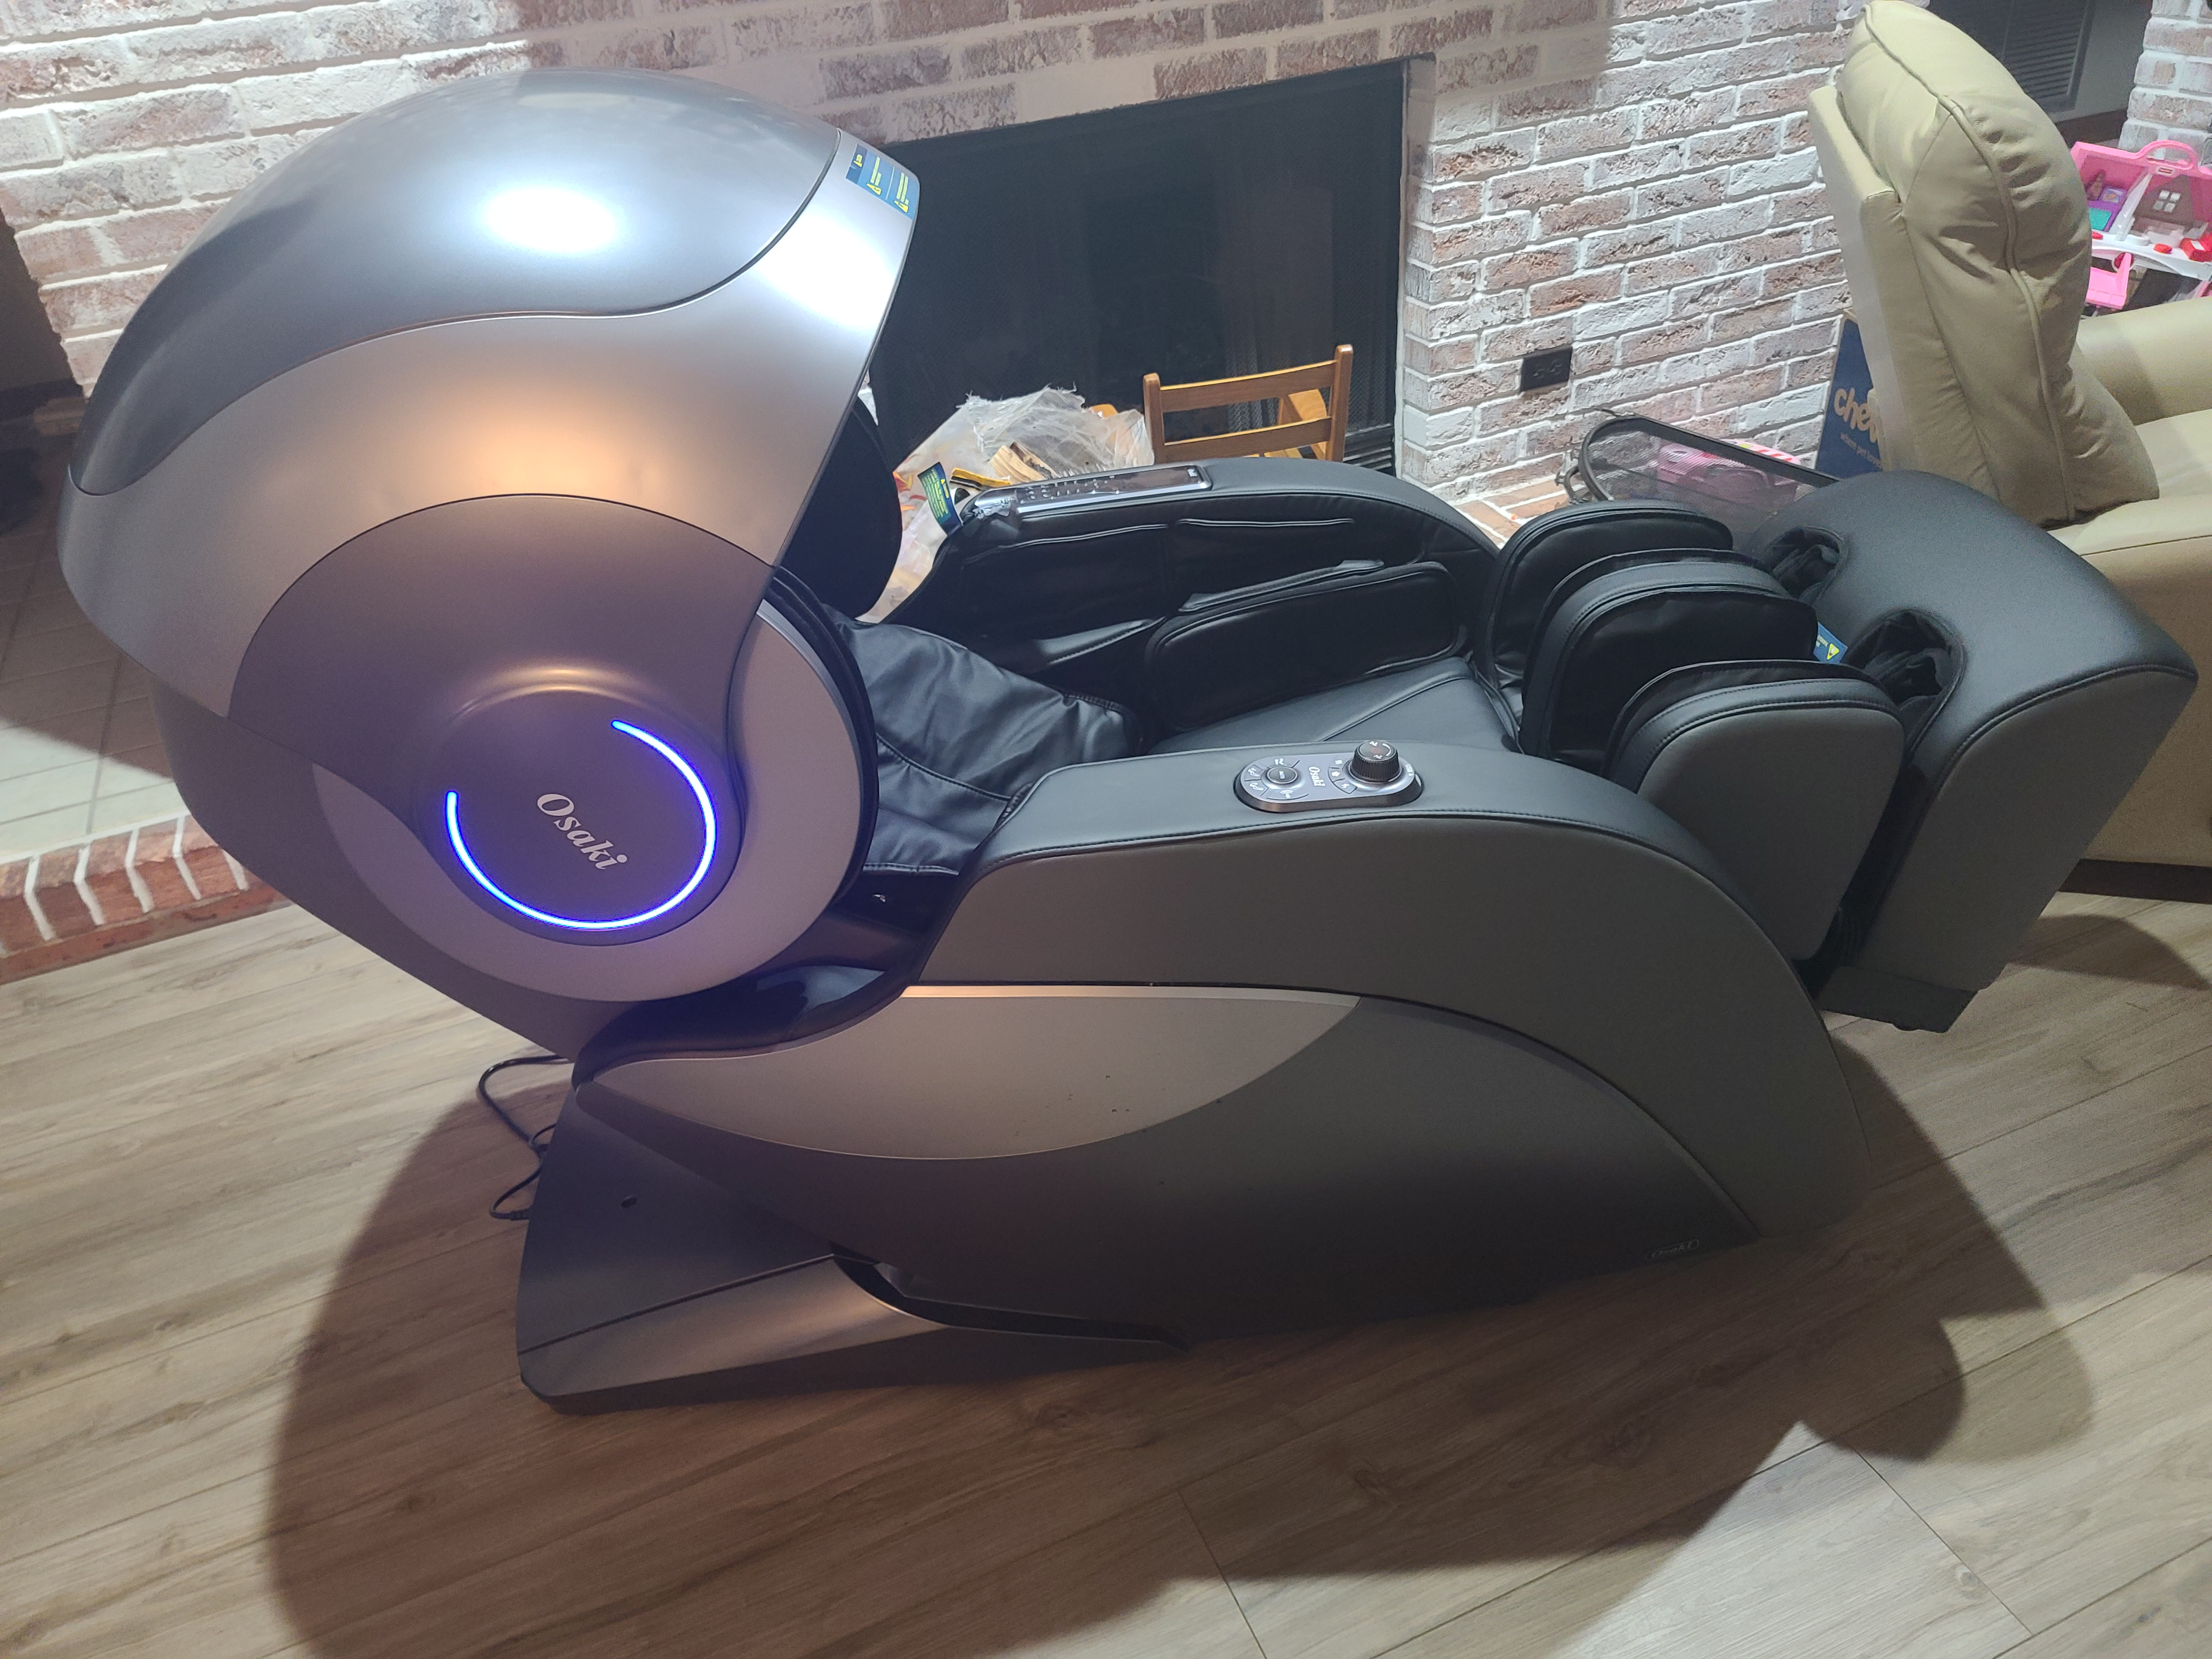 Massage Chair Planet 5 star review on 17th January 2021